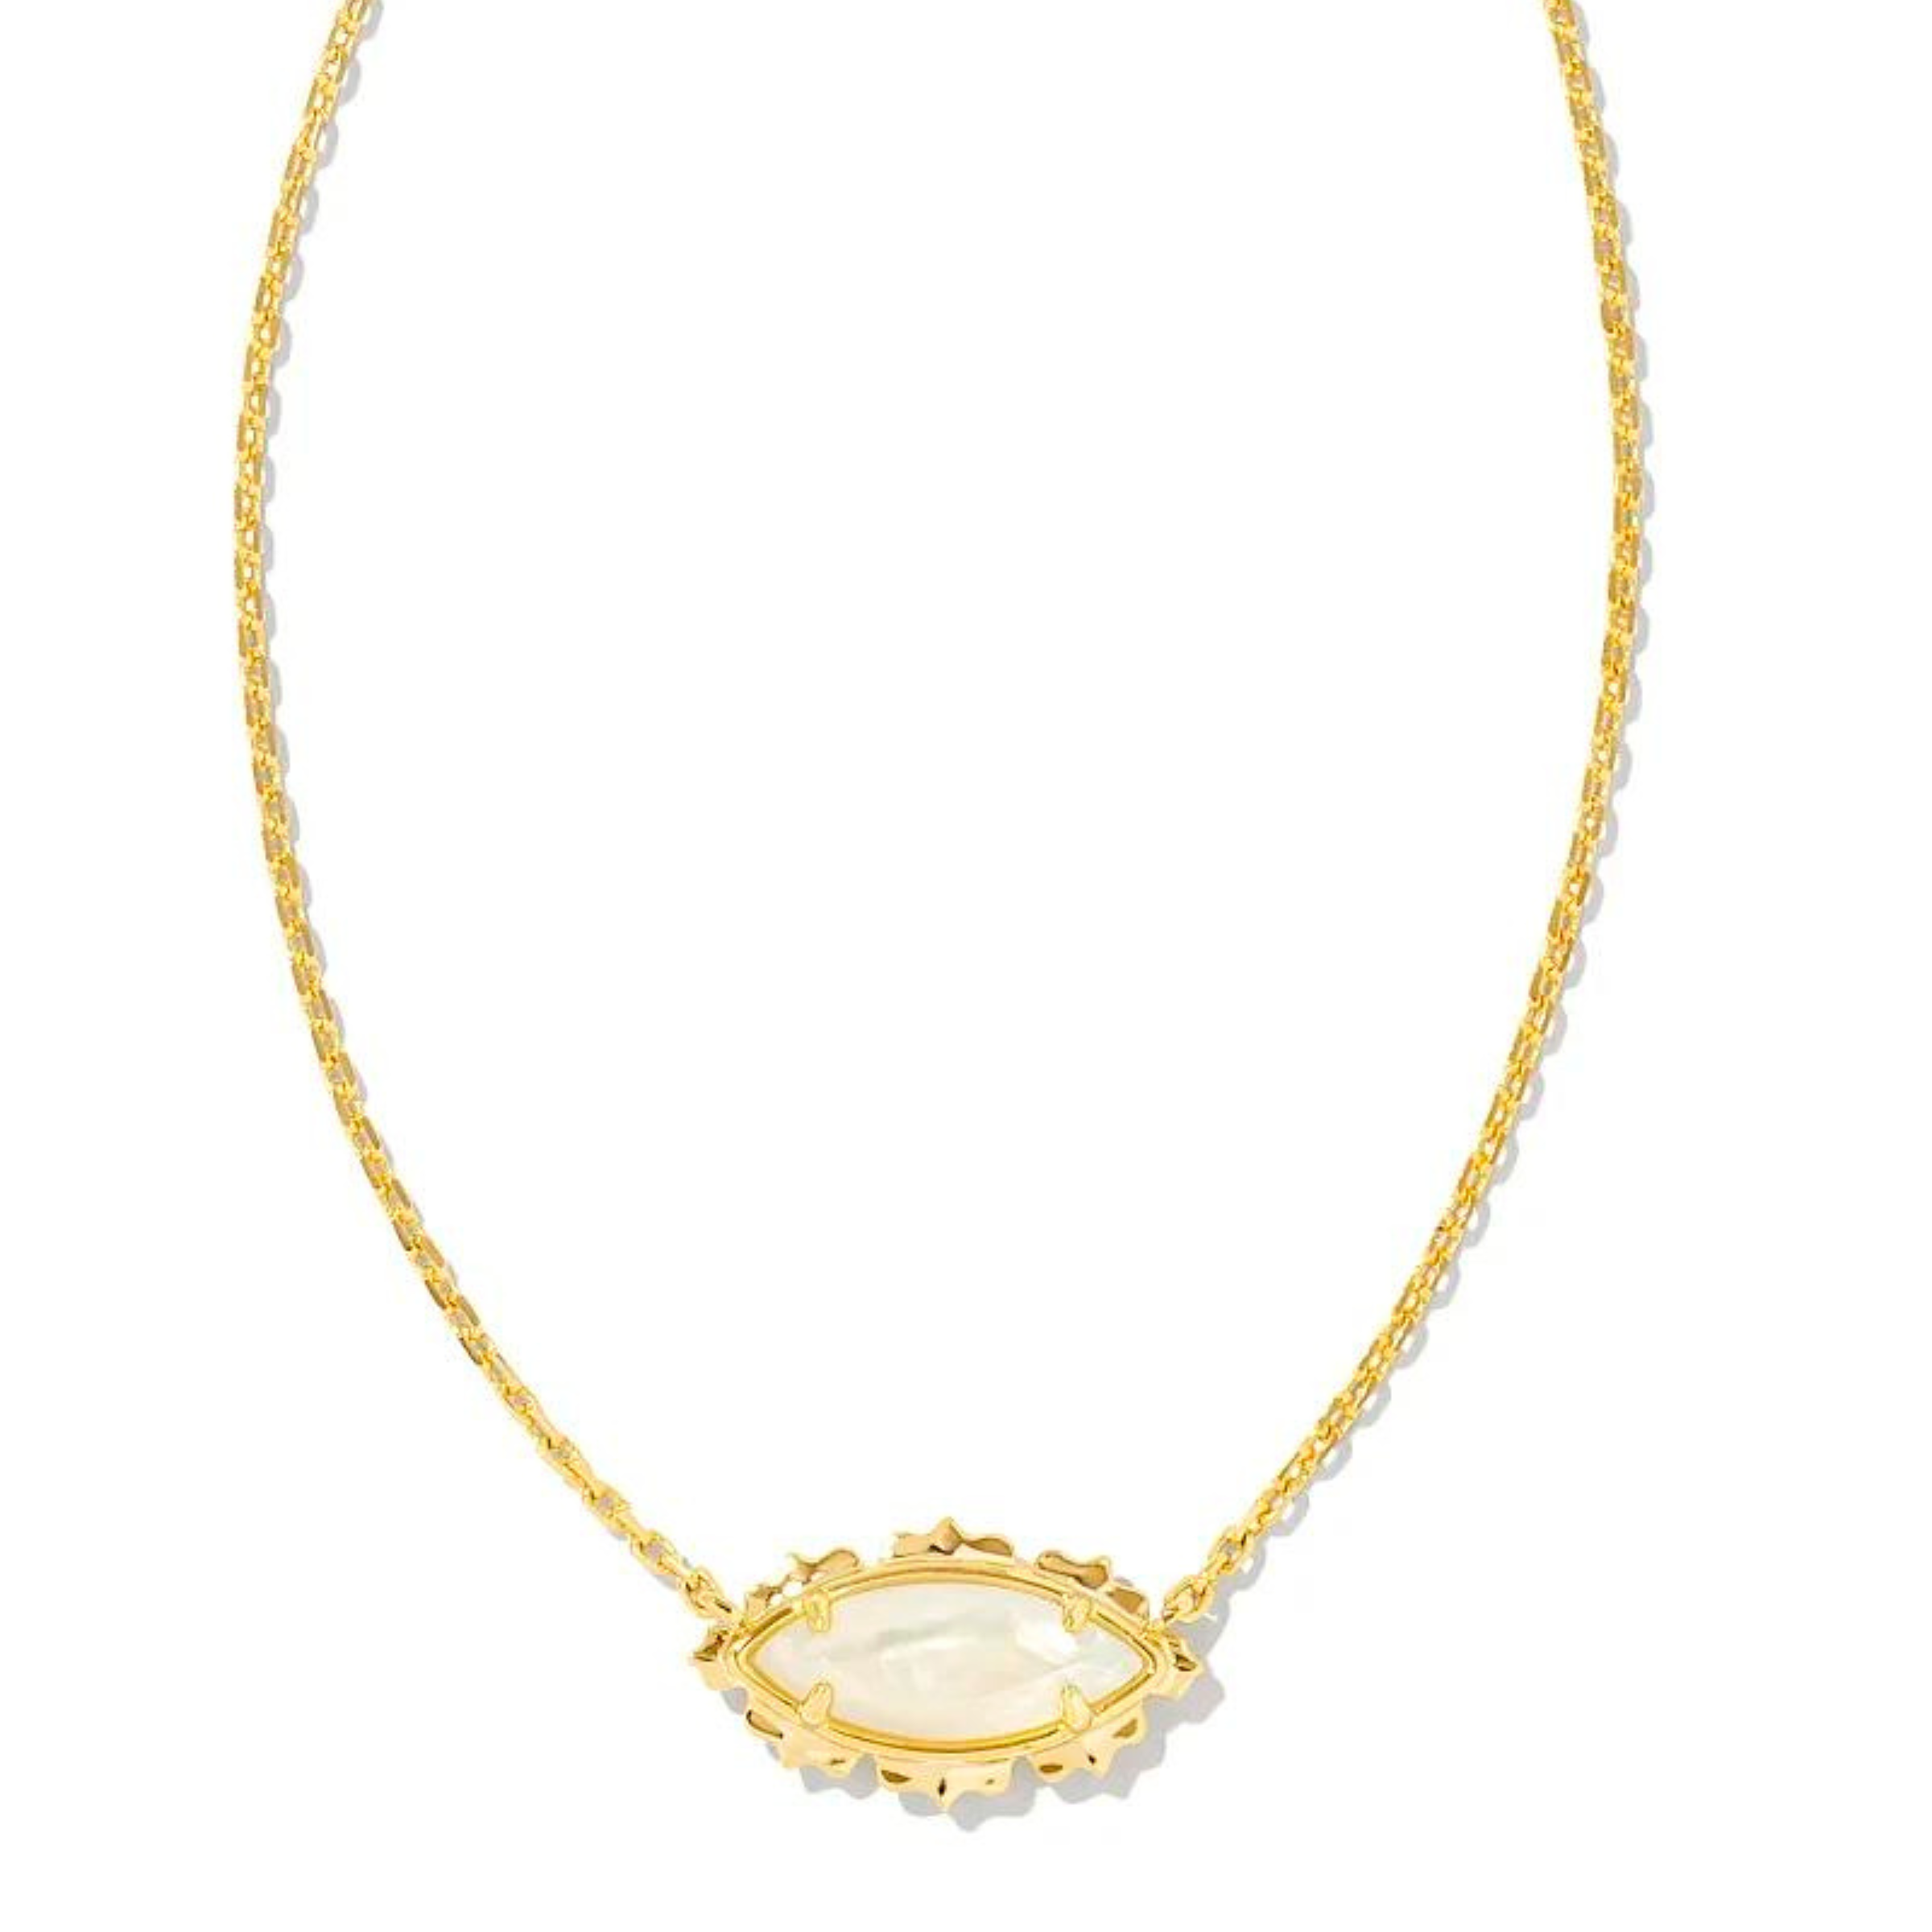 Gold chain necklace with a mother of pearl crystal oval pendant. This necklace is pictured on a white background. 